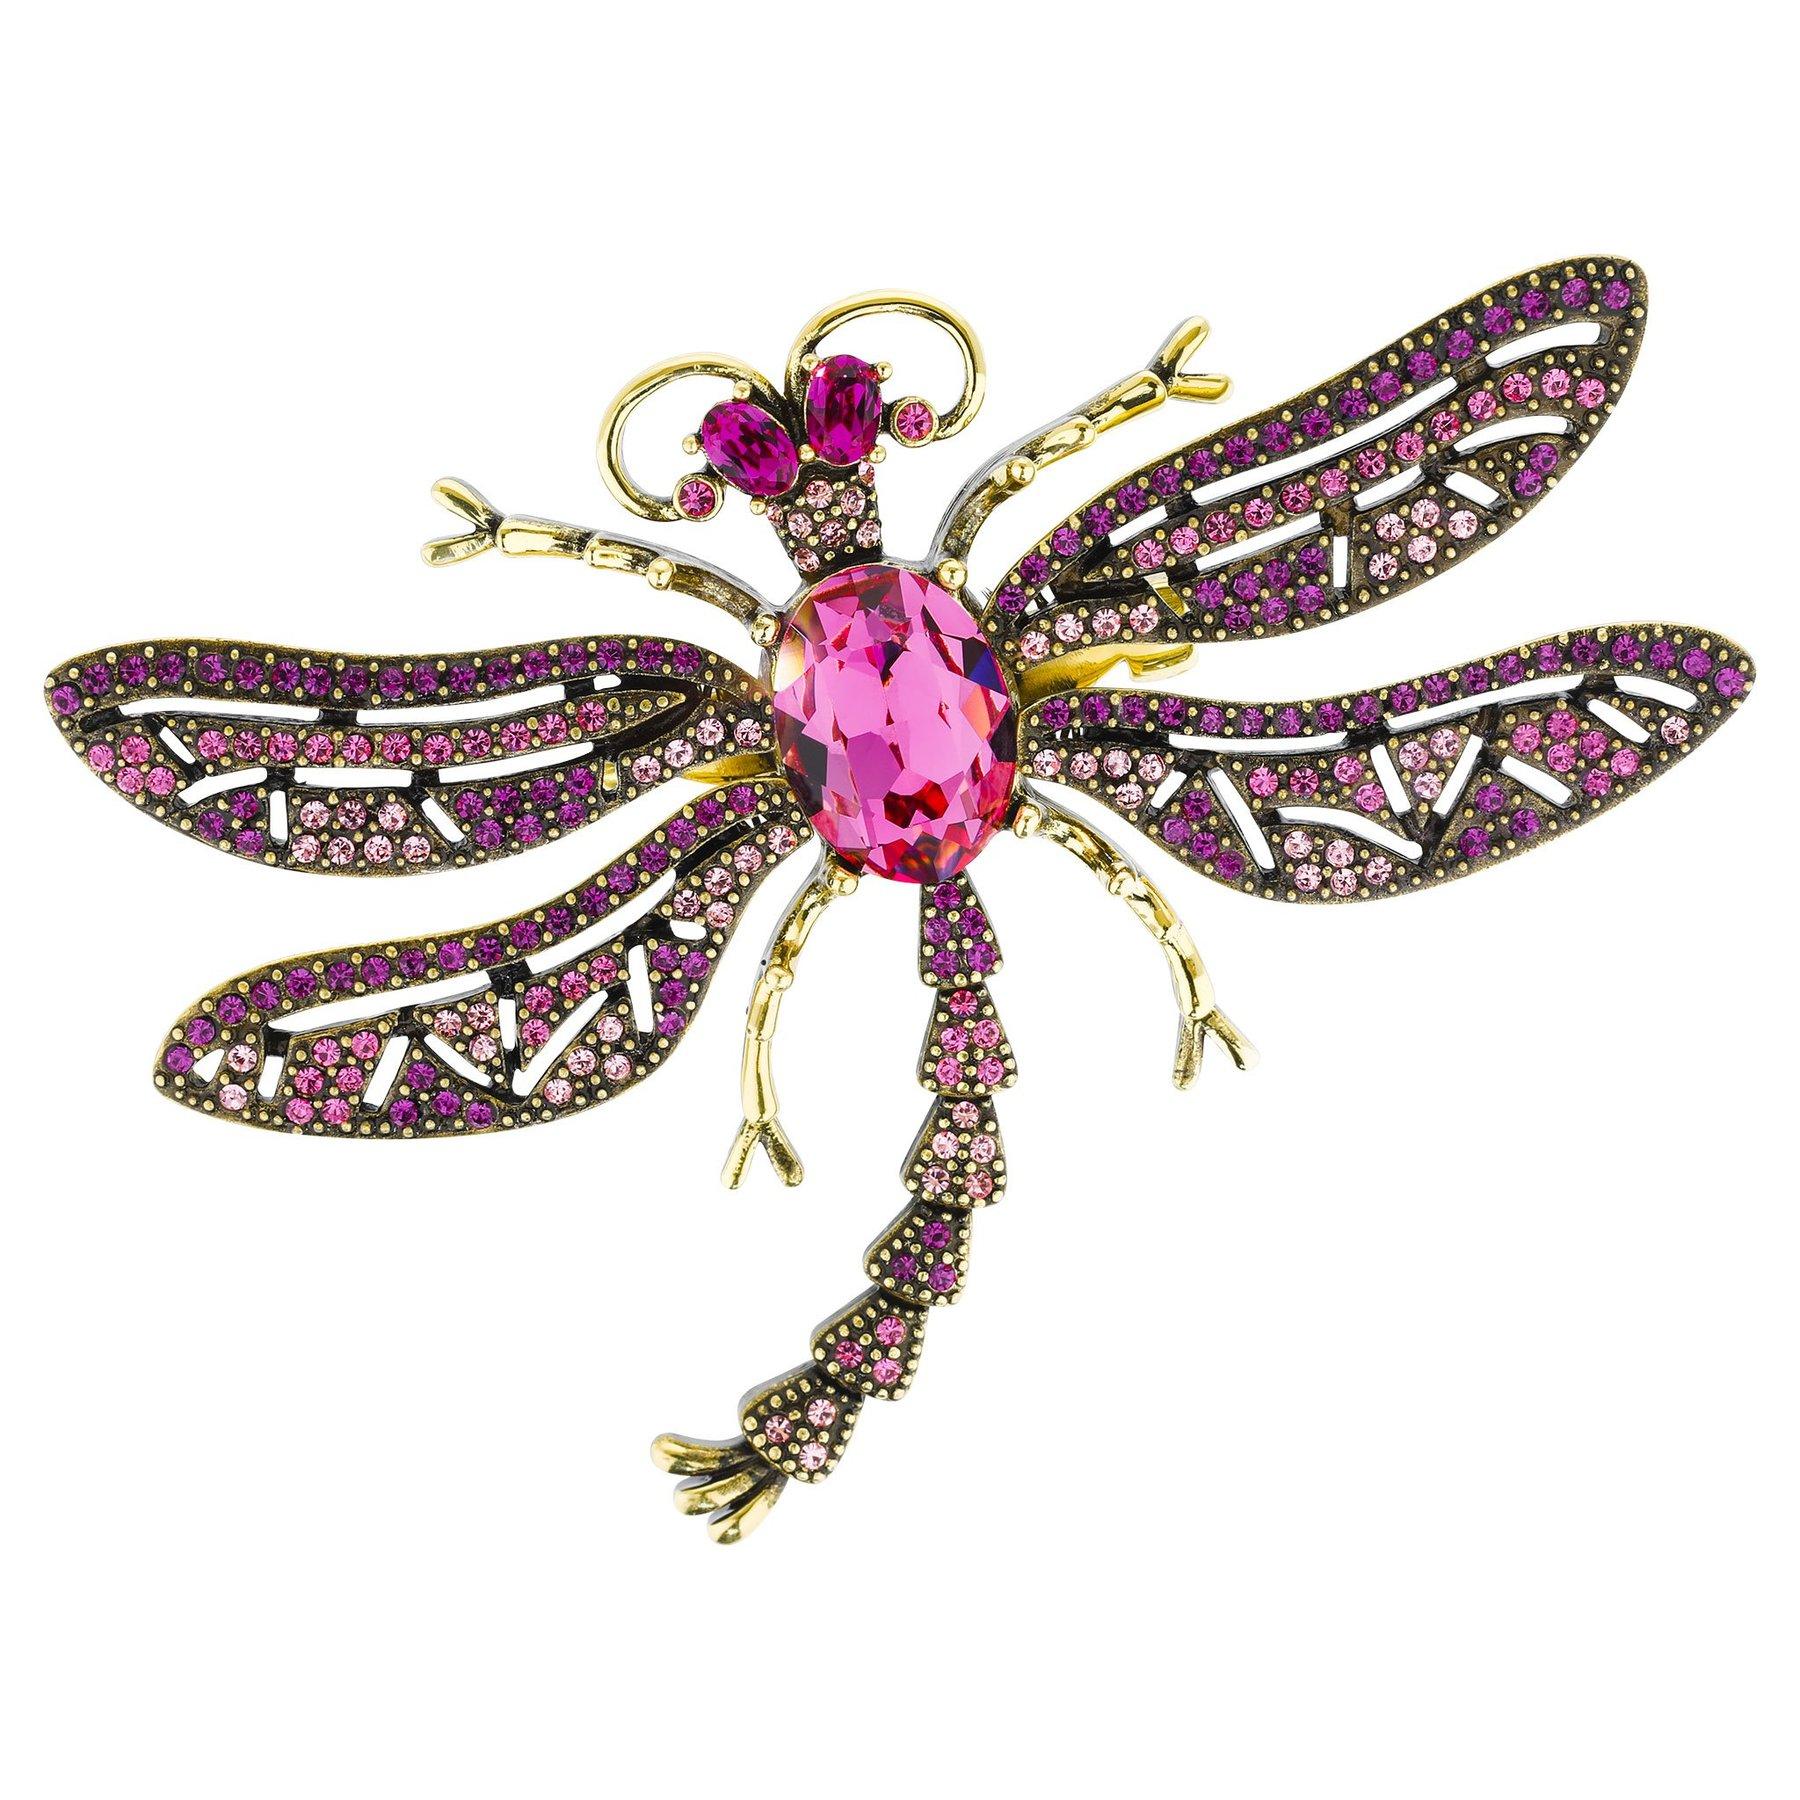 Heidi Daus Trembling Brilliance Crystal Accented Dragonfly Pin Fushia Pink Multi In New Condition For Sale In Houston, TX